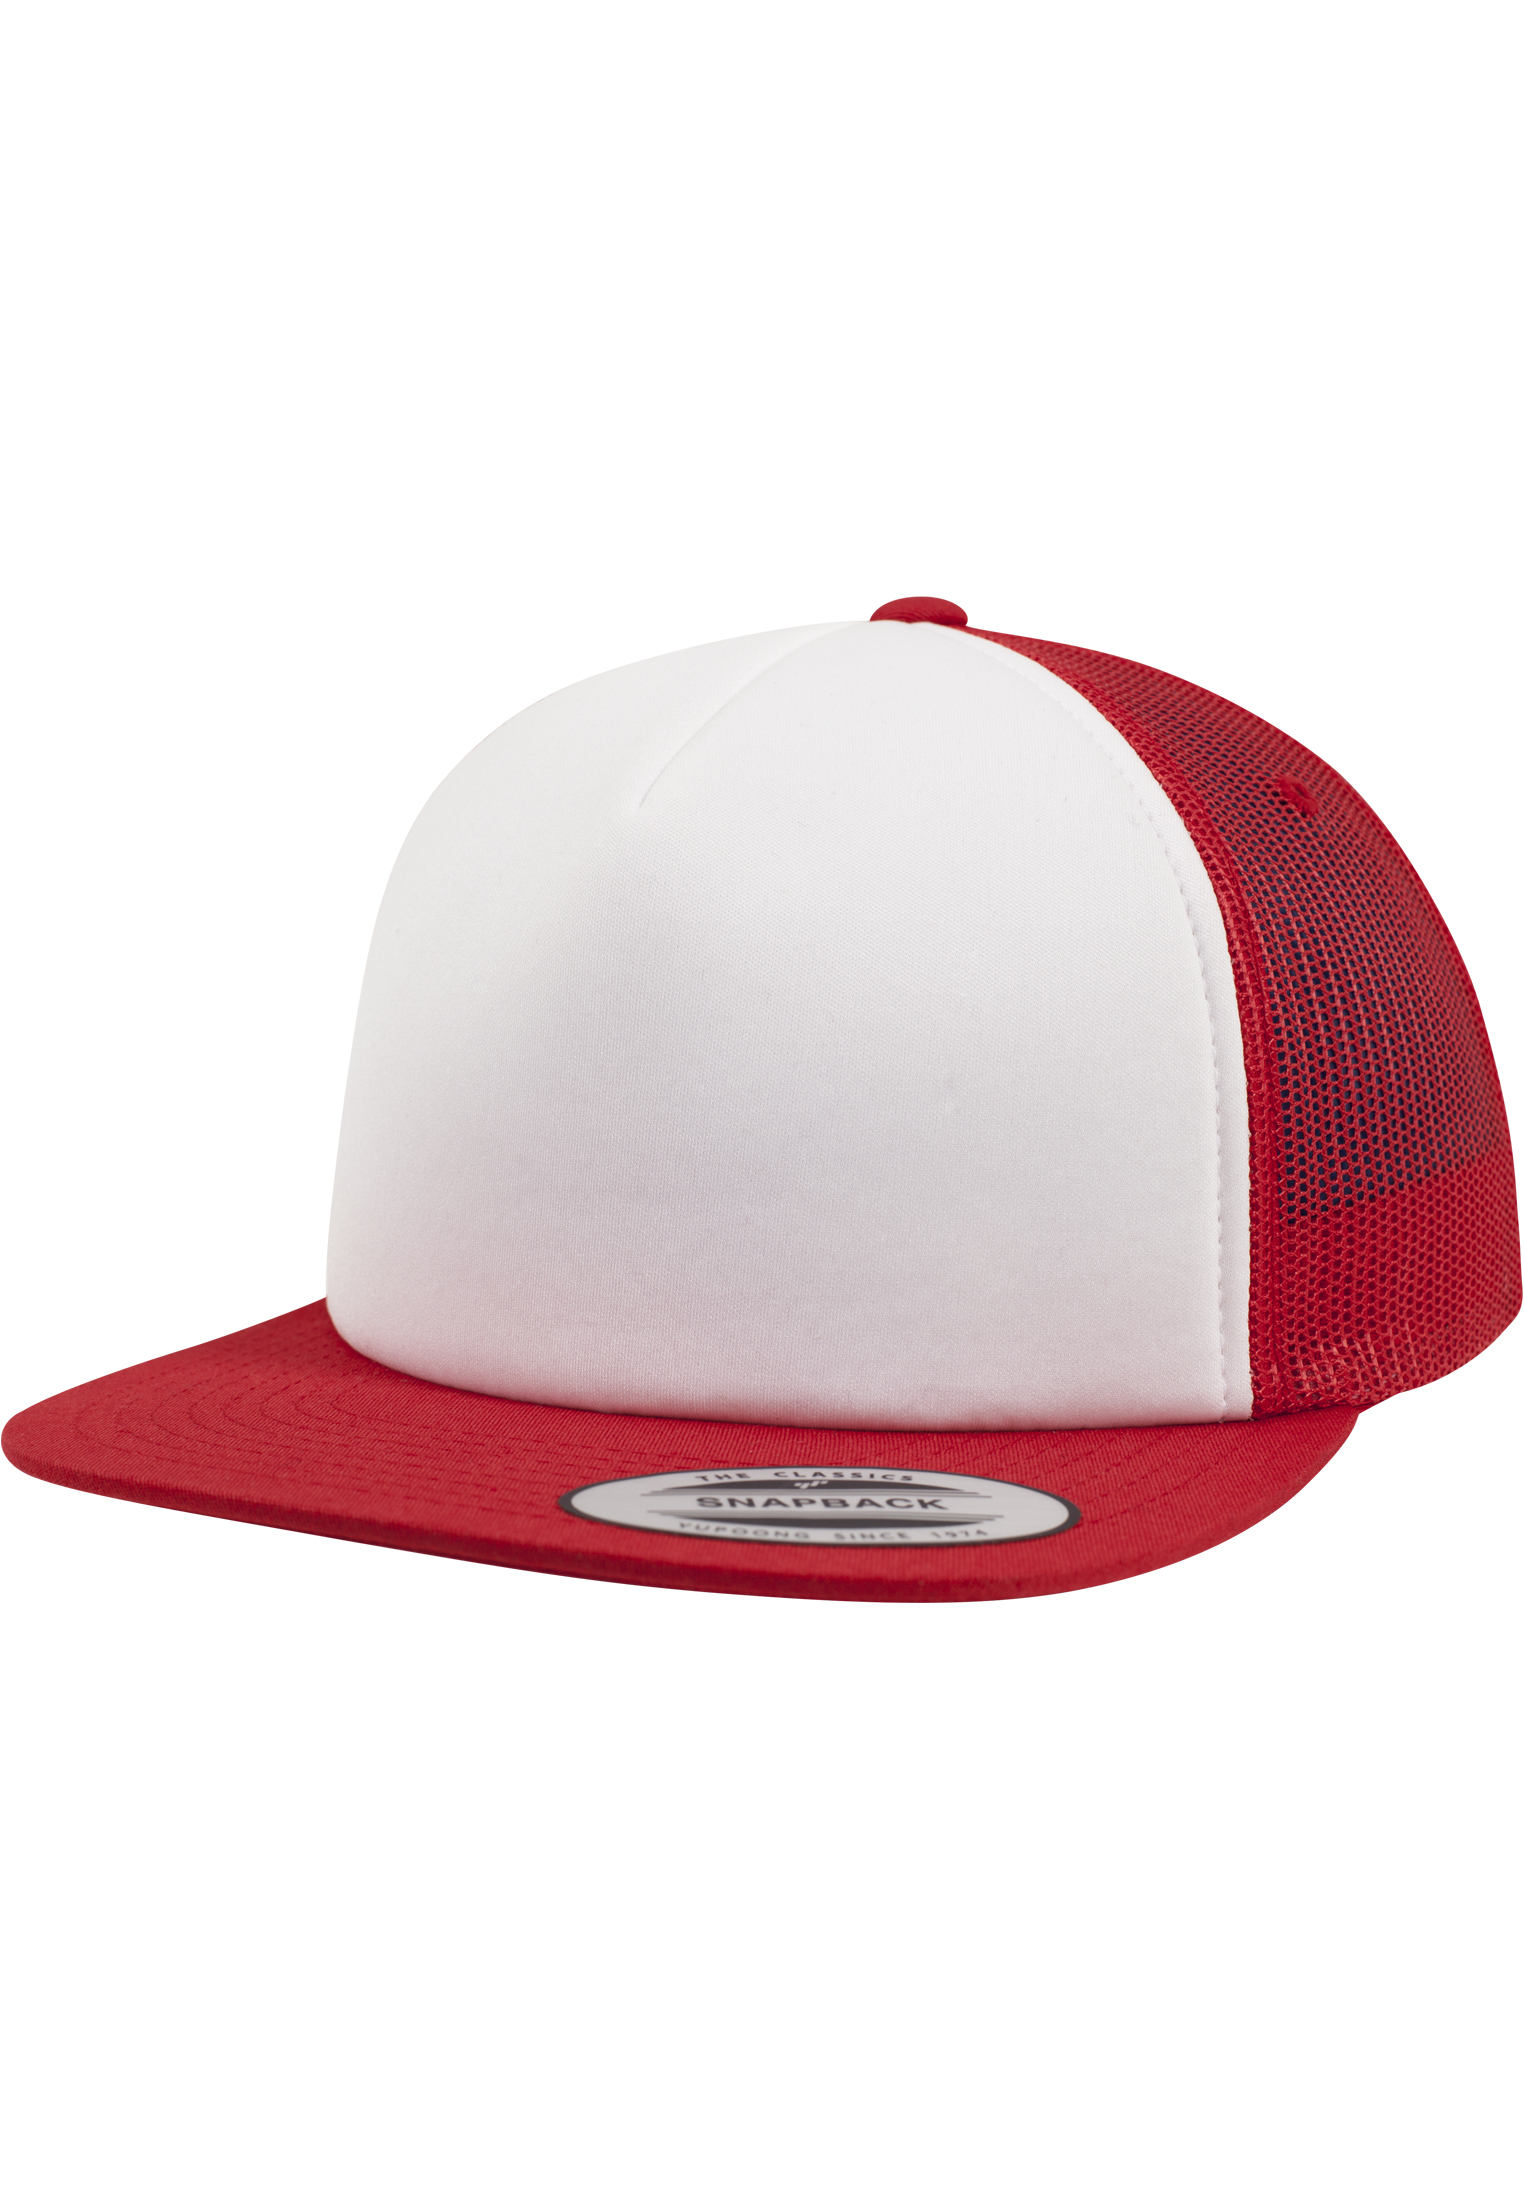 Trucker Foam Trucker with White Front in Farbe red/wht/red